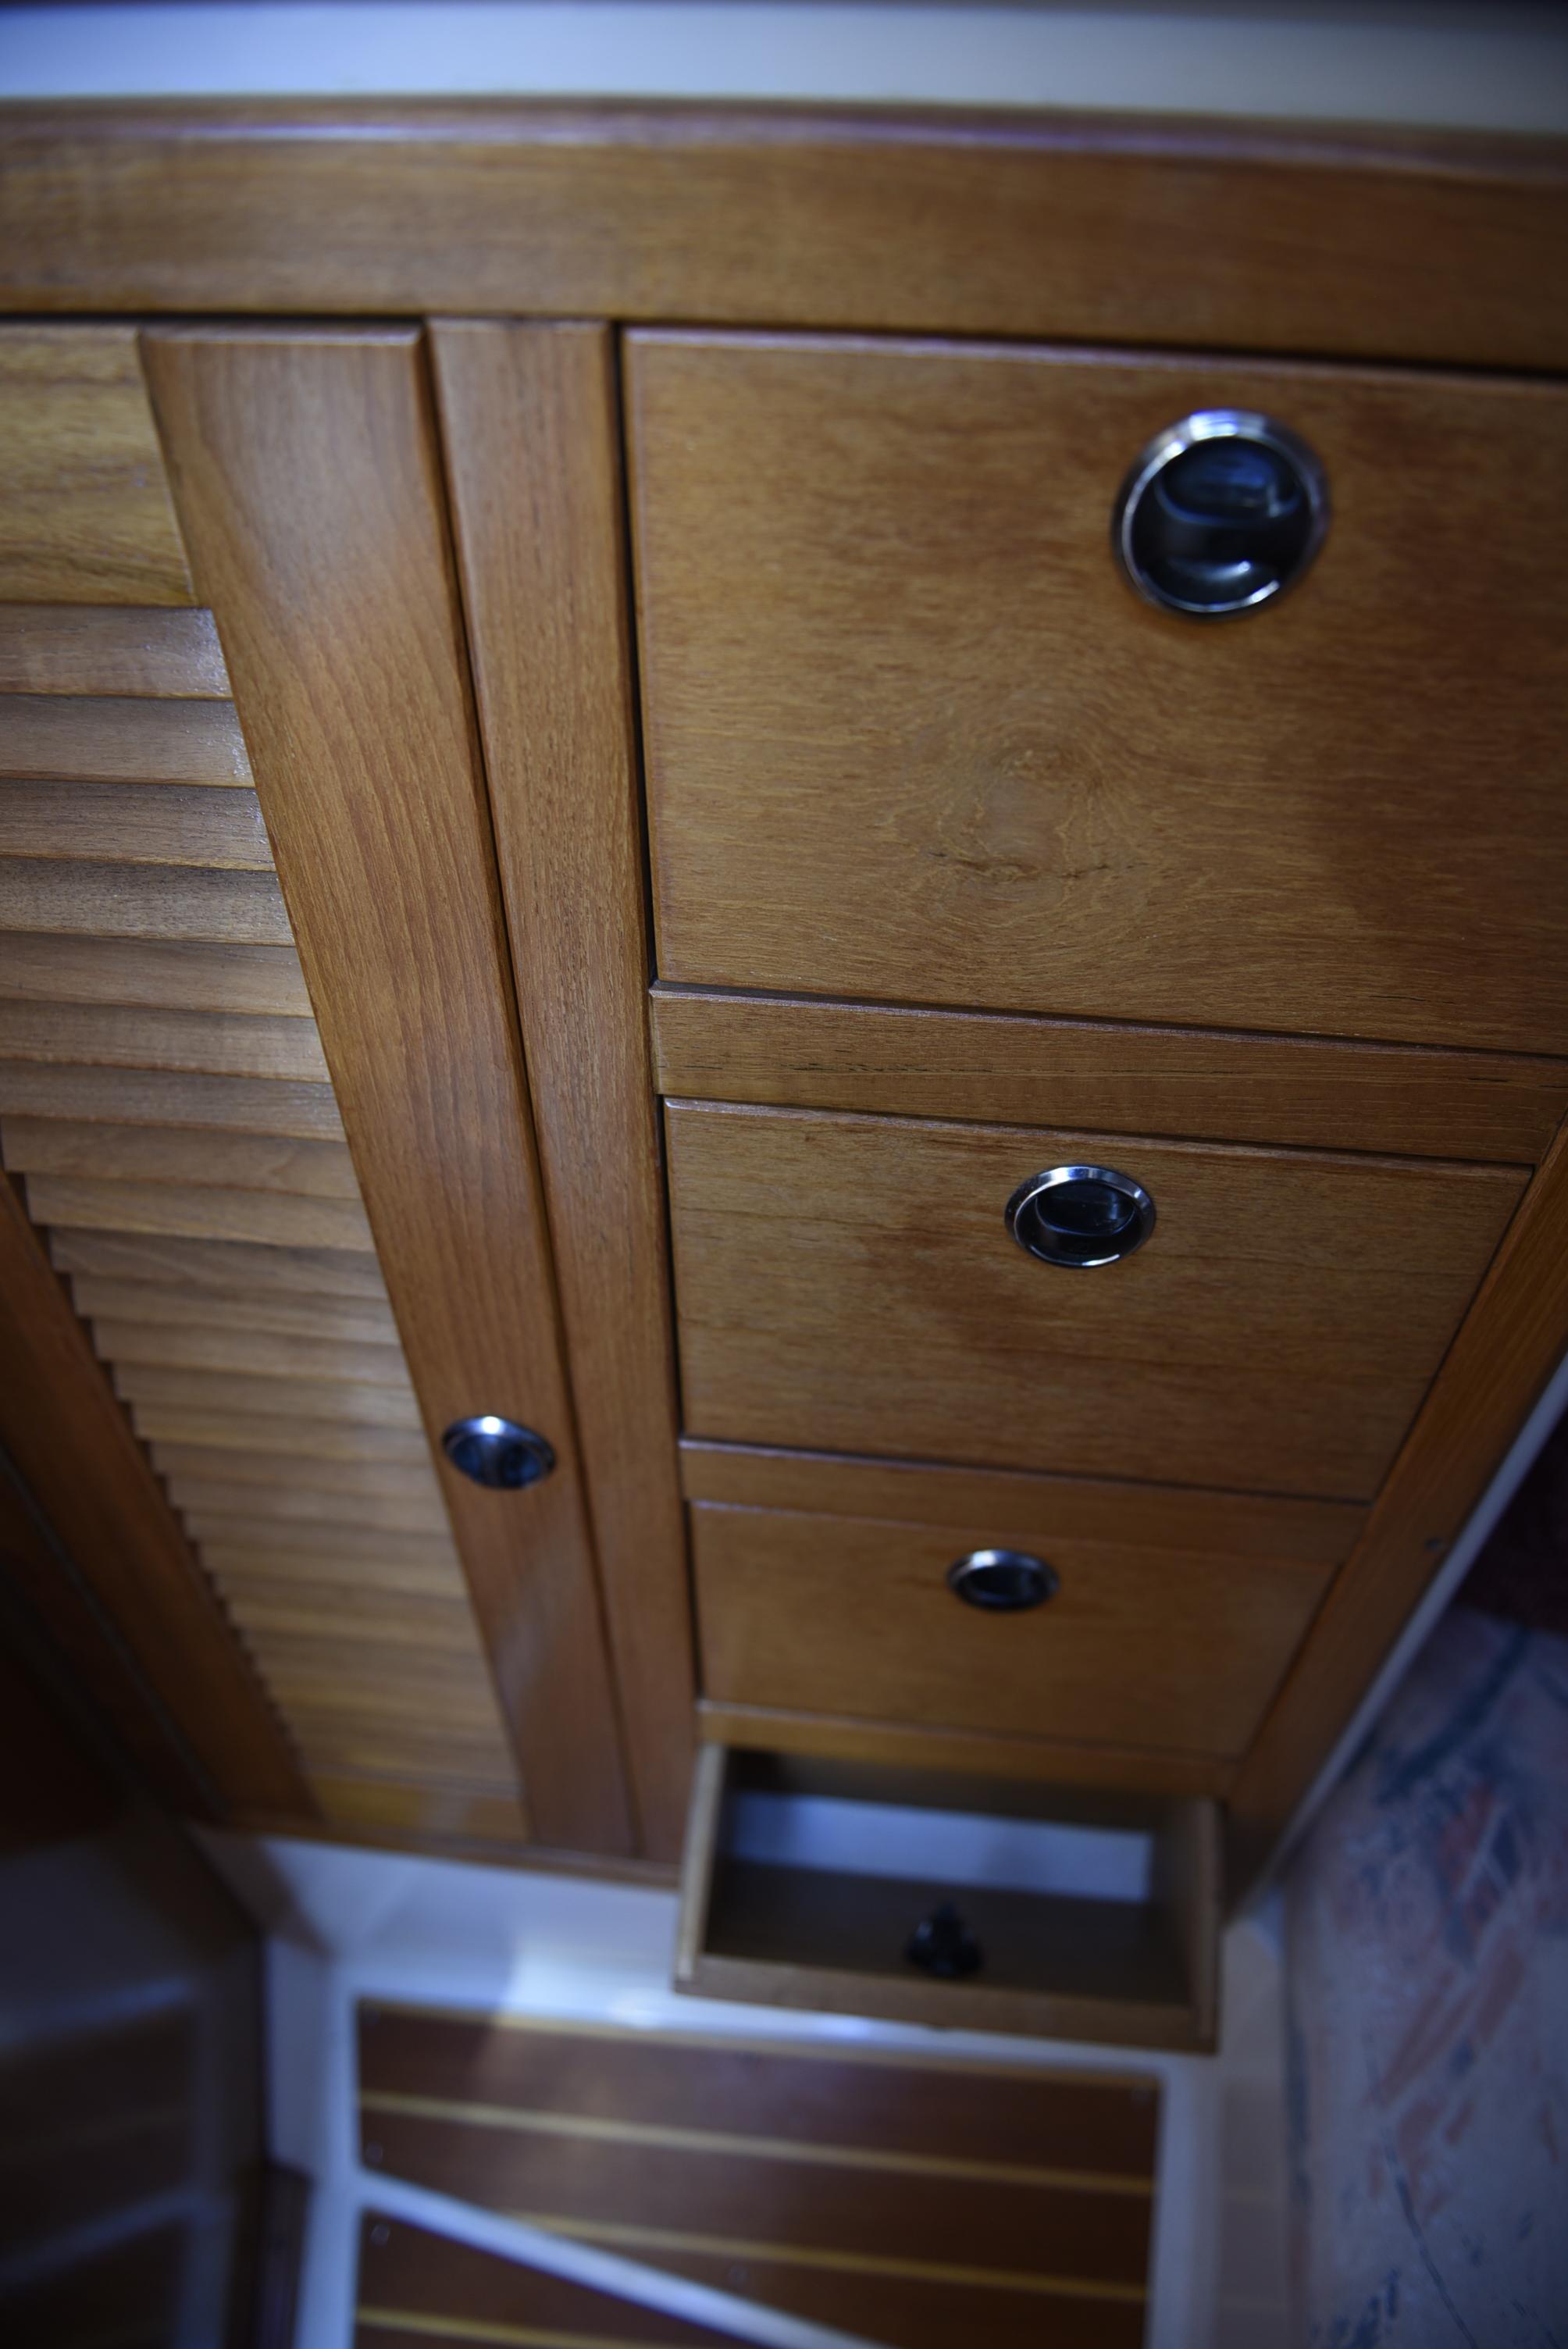 Hanging locker and drawers in aft stateroom